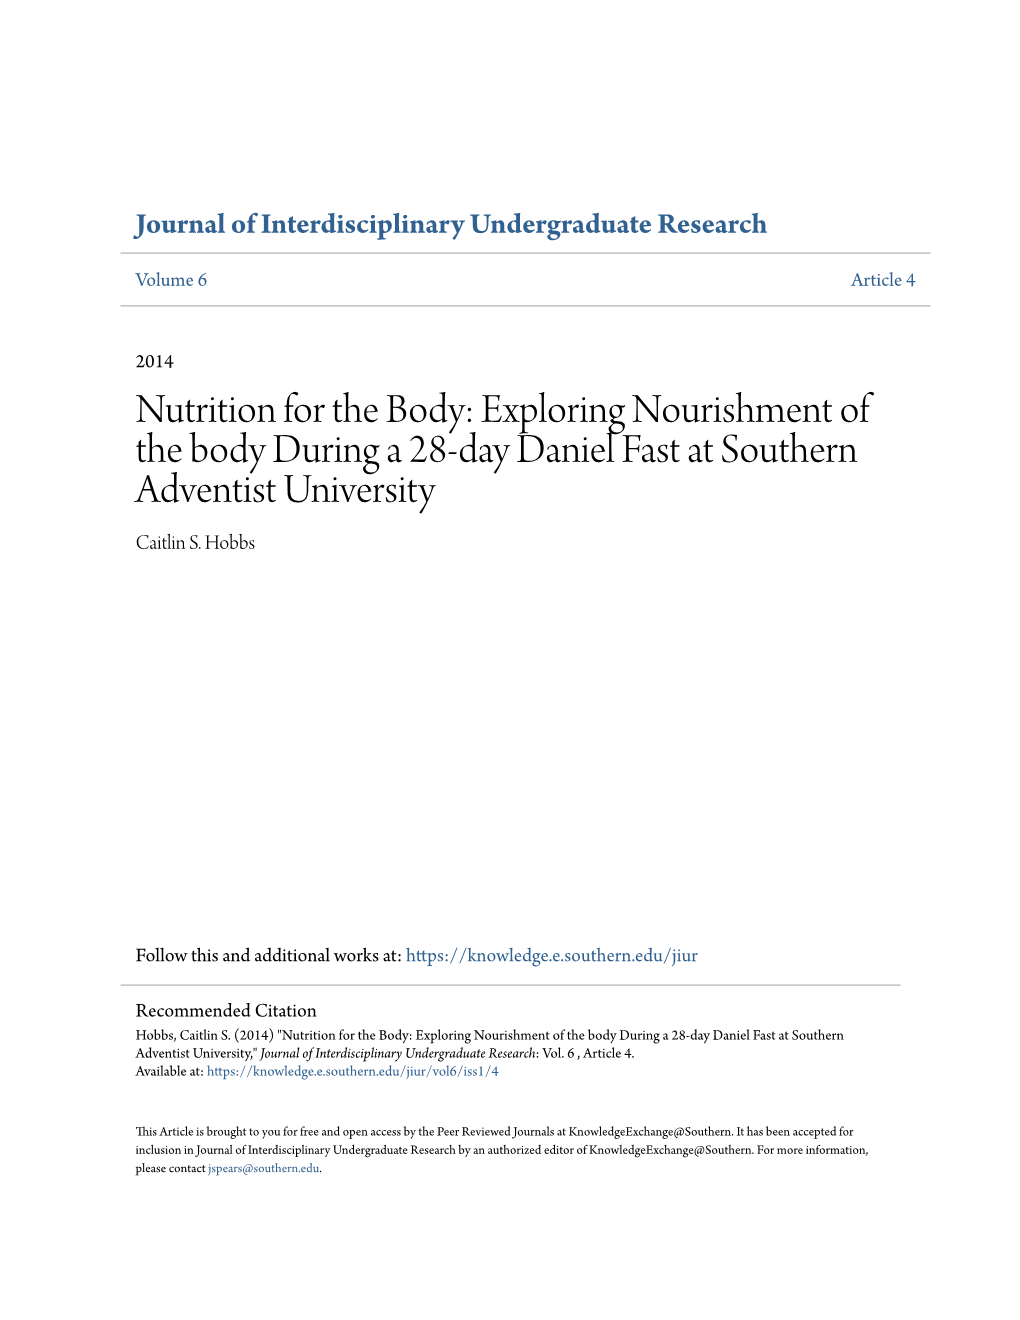 Nutrition for the Body: Exploring Nourishment of the Body During a 28-Day Daniel Fast at Southern Adventist University Caitlin S